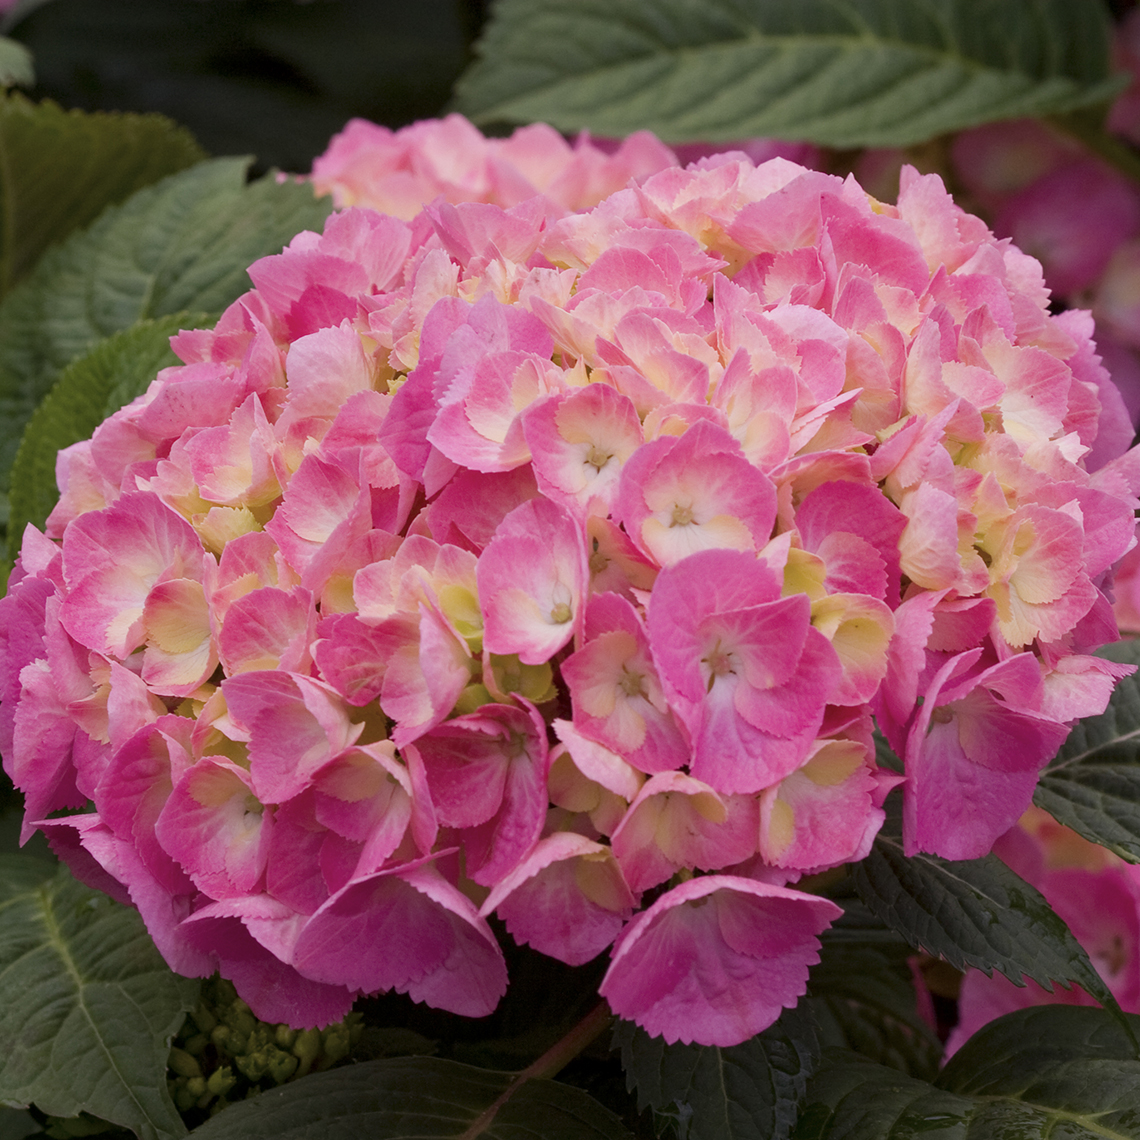 Closeup of the pink blooms of Lets Dance Big Easy hydrangea showing the creamy eye in the center of each floret